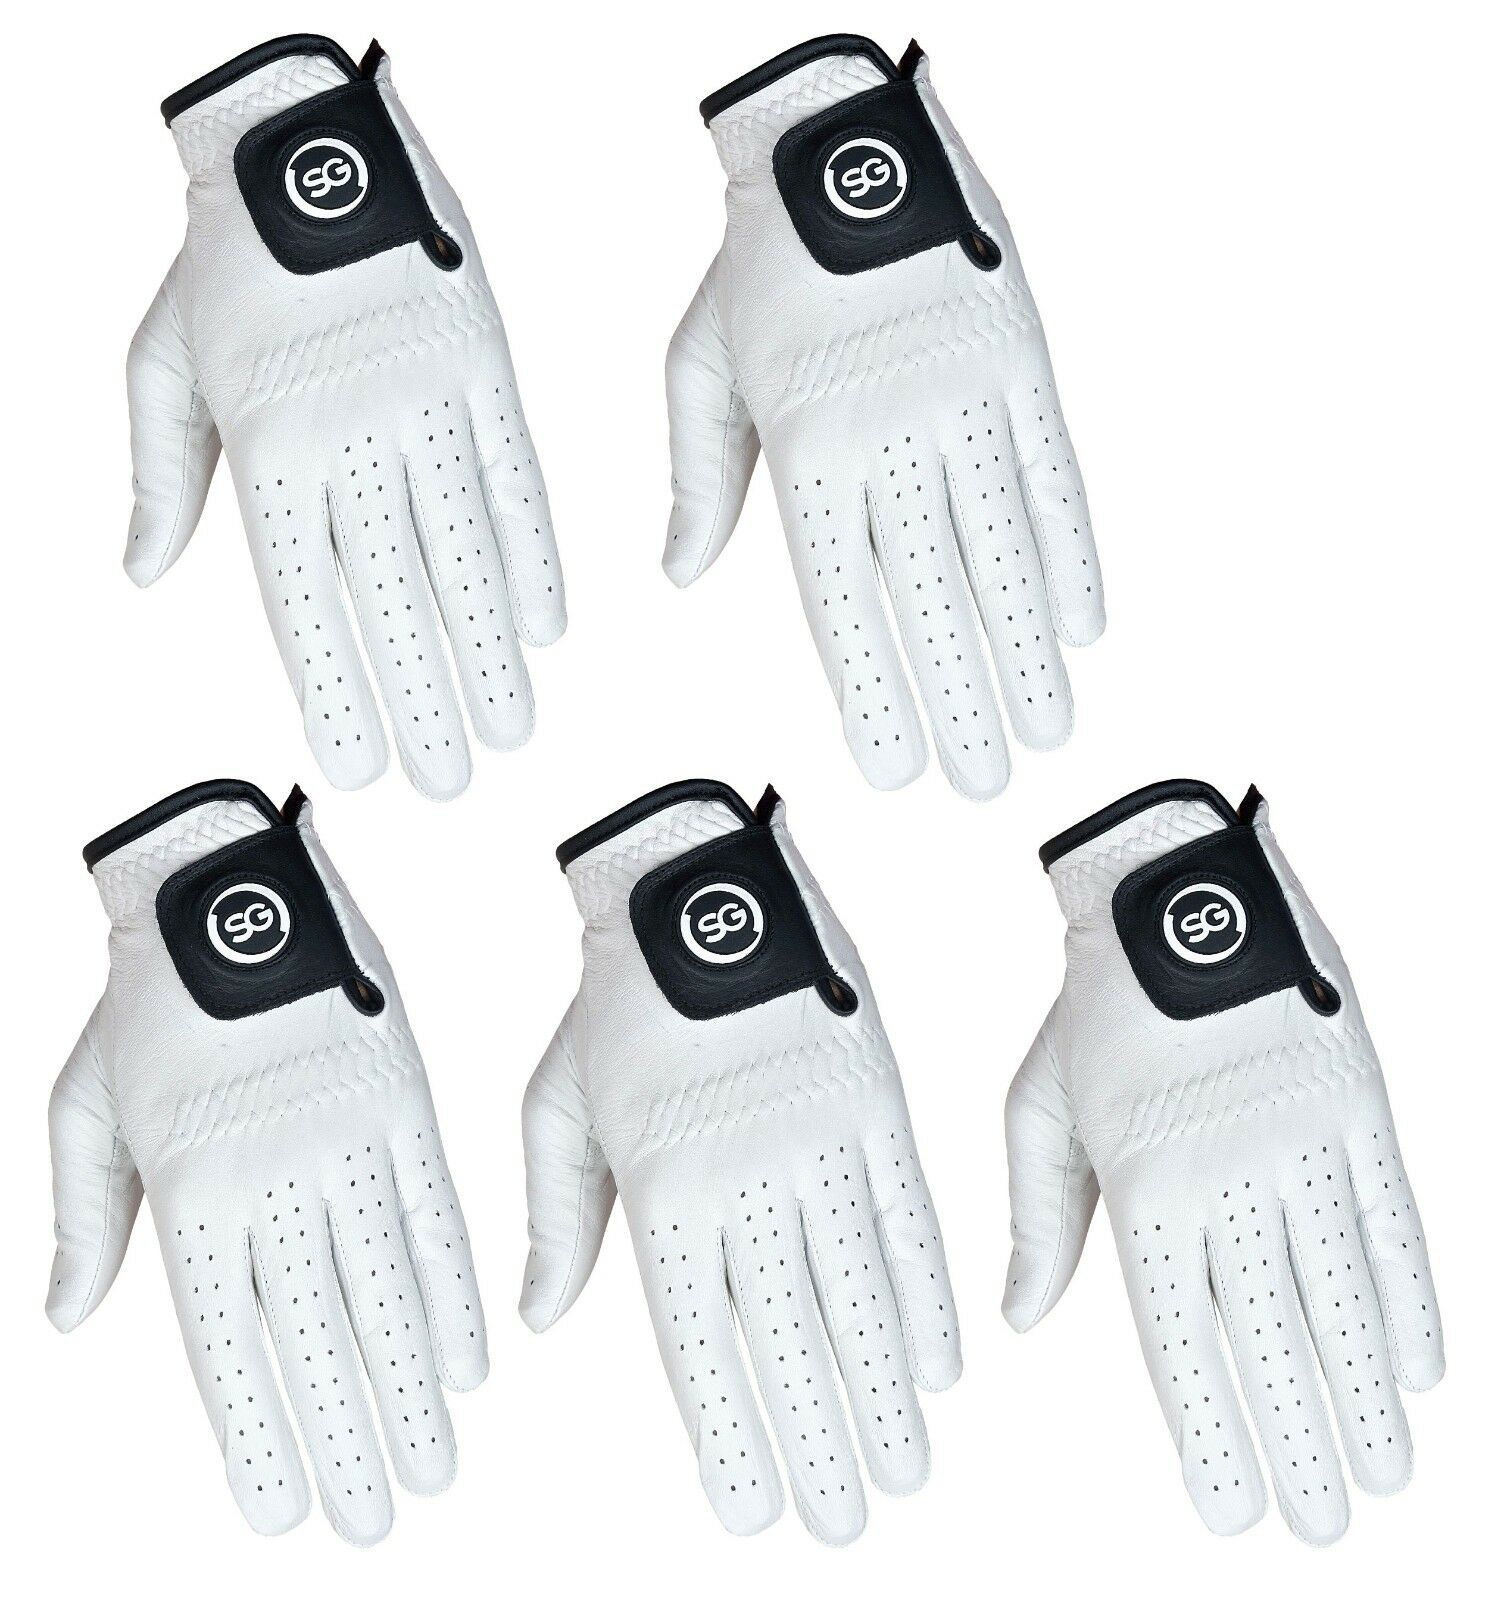 Sg 5 Men 100% Cabretta Leather Golf Gloves Both Hand Gloves All Sizes Available